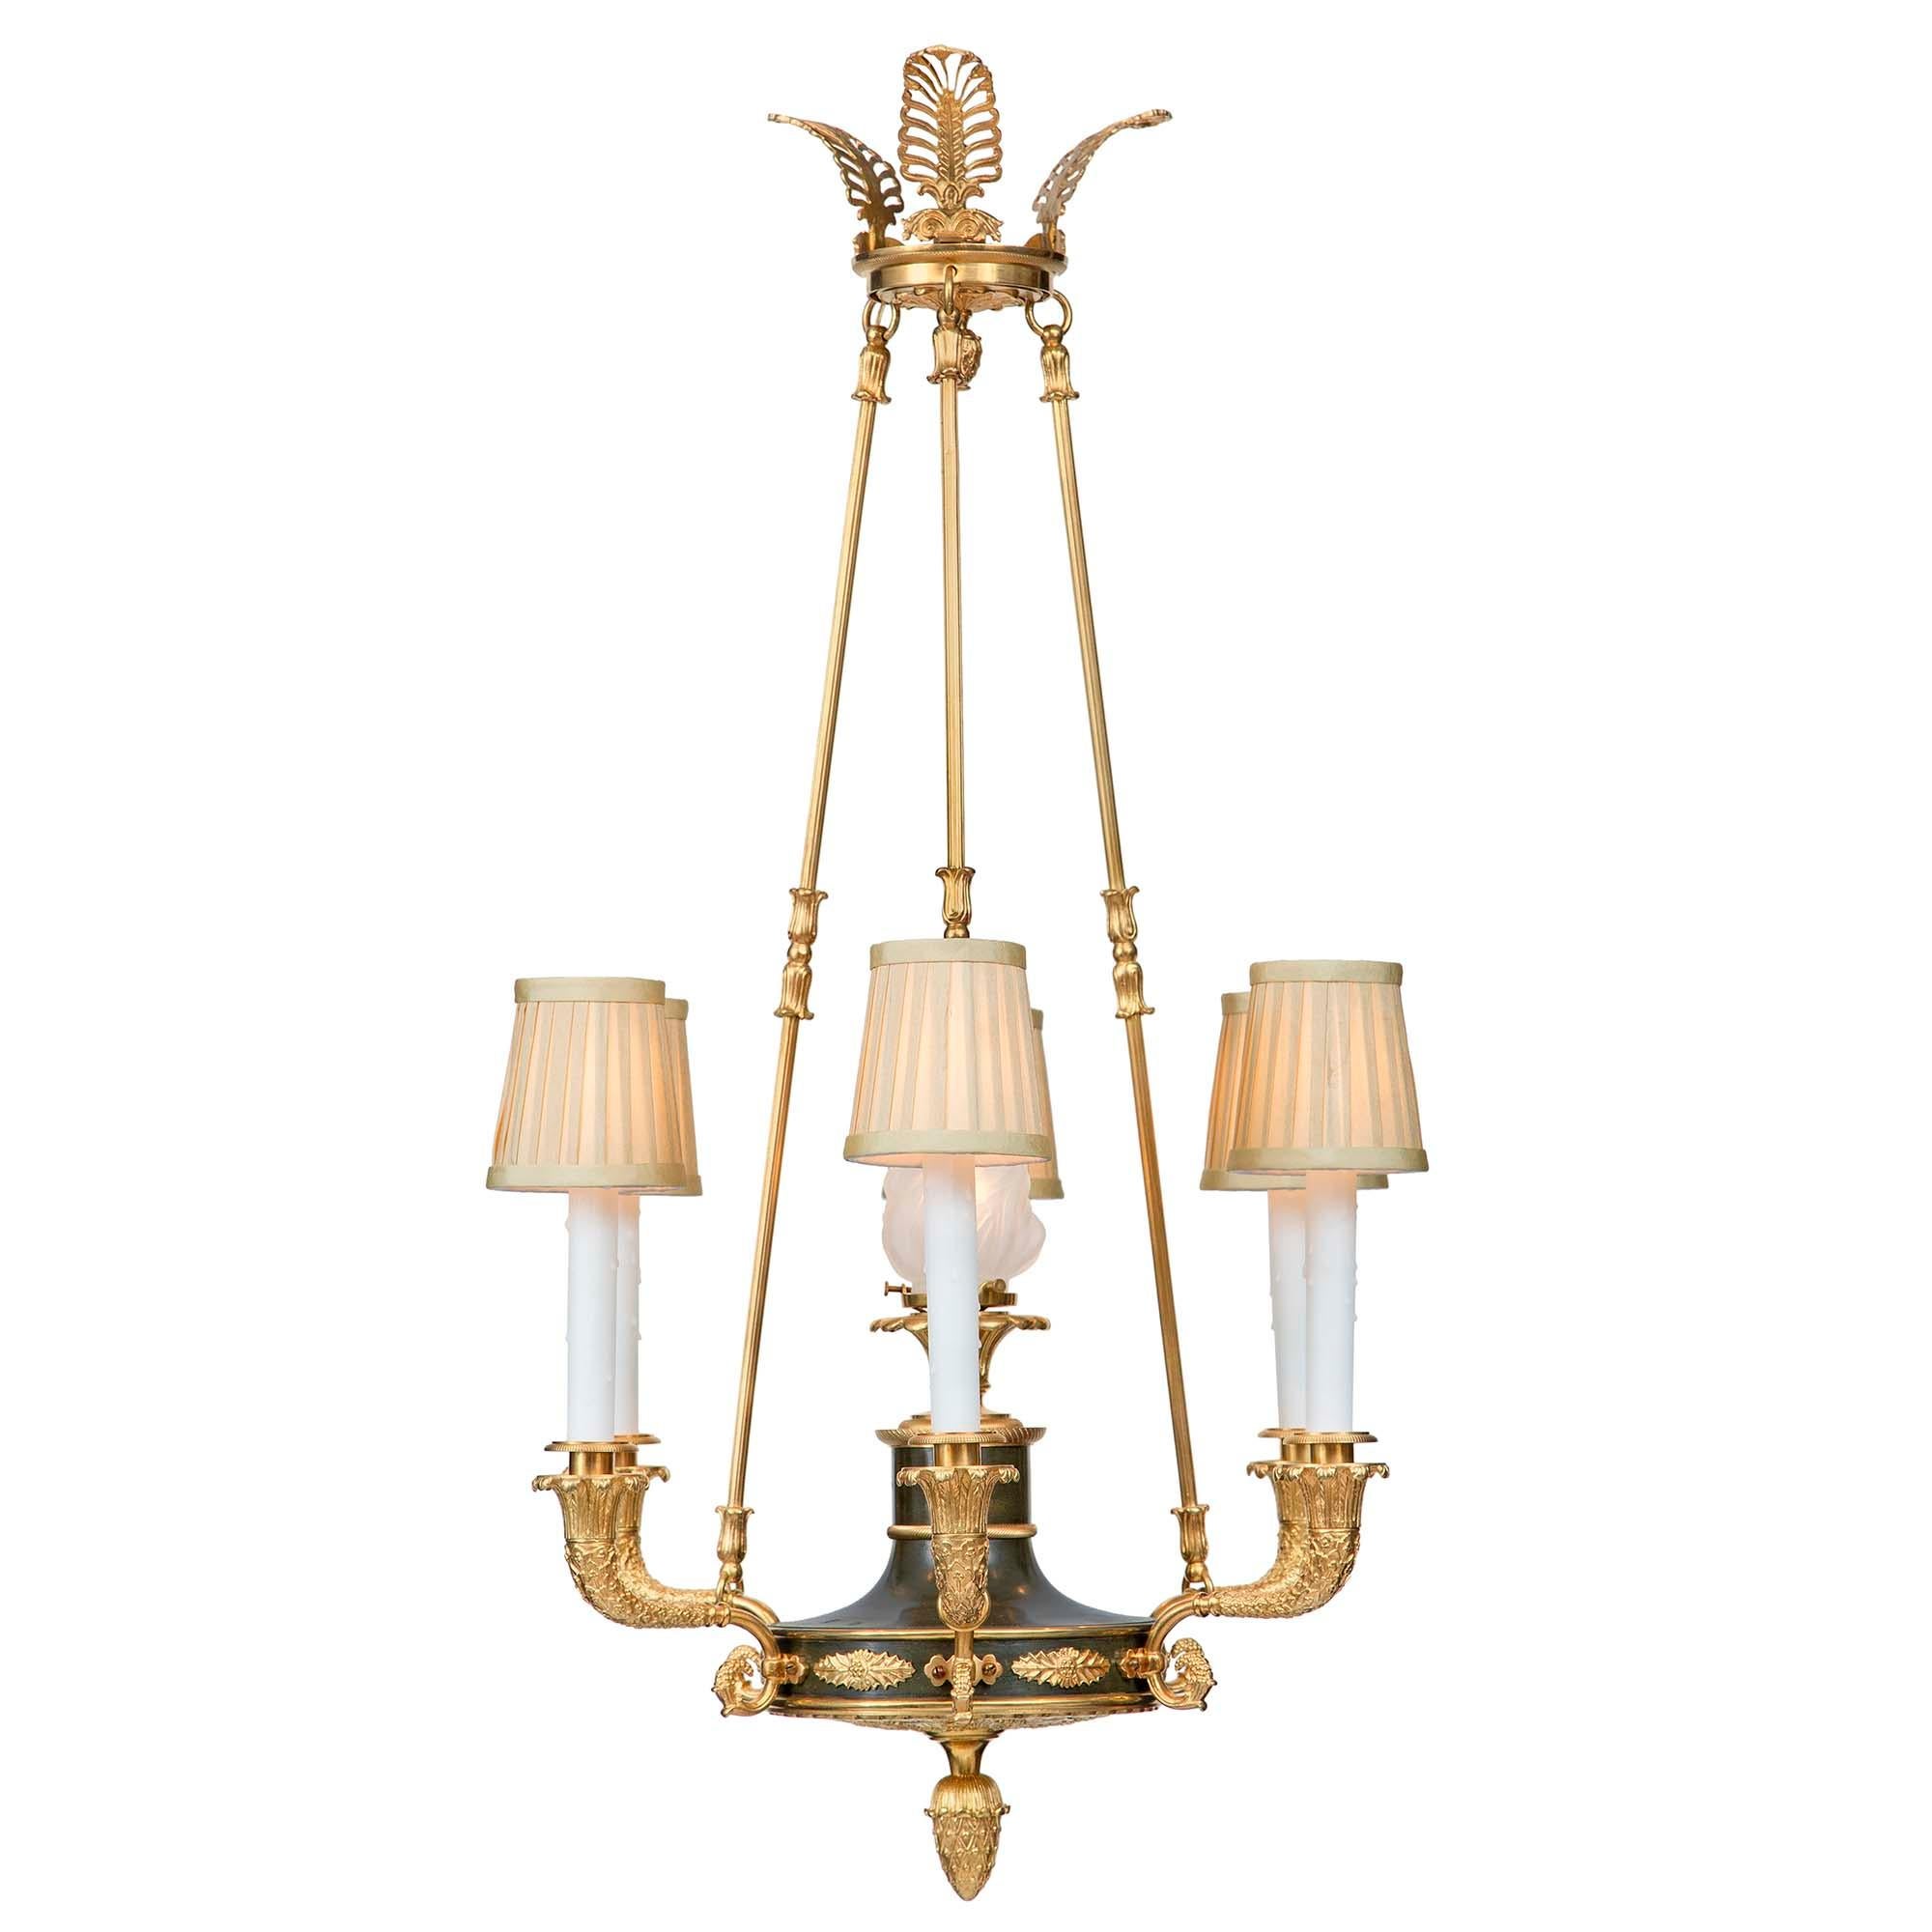 French 19th Century Empire Style Bronze and Ormolu Seven-Light Chandelier For Sale